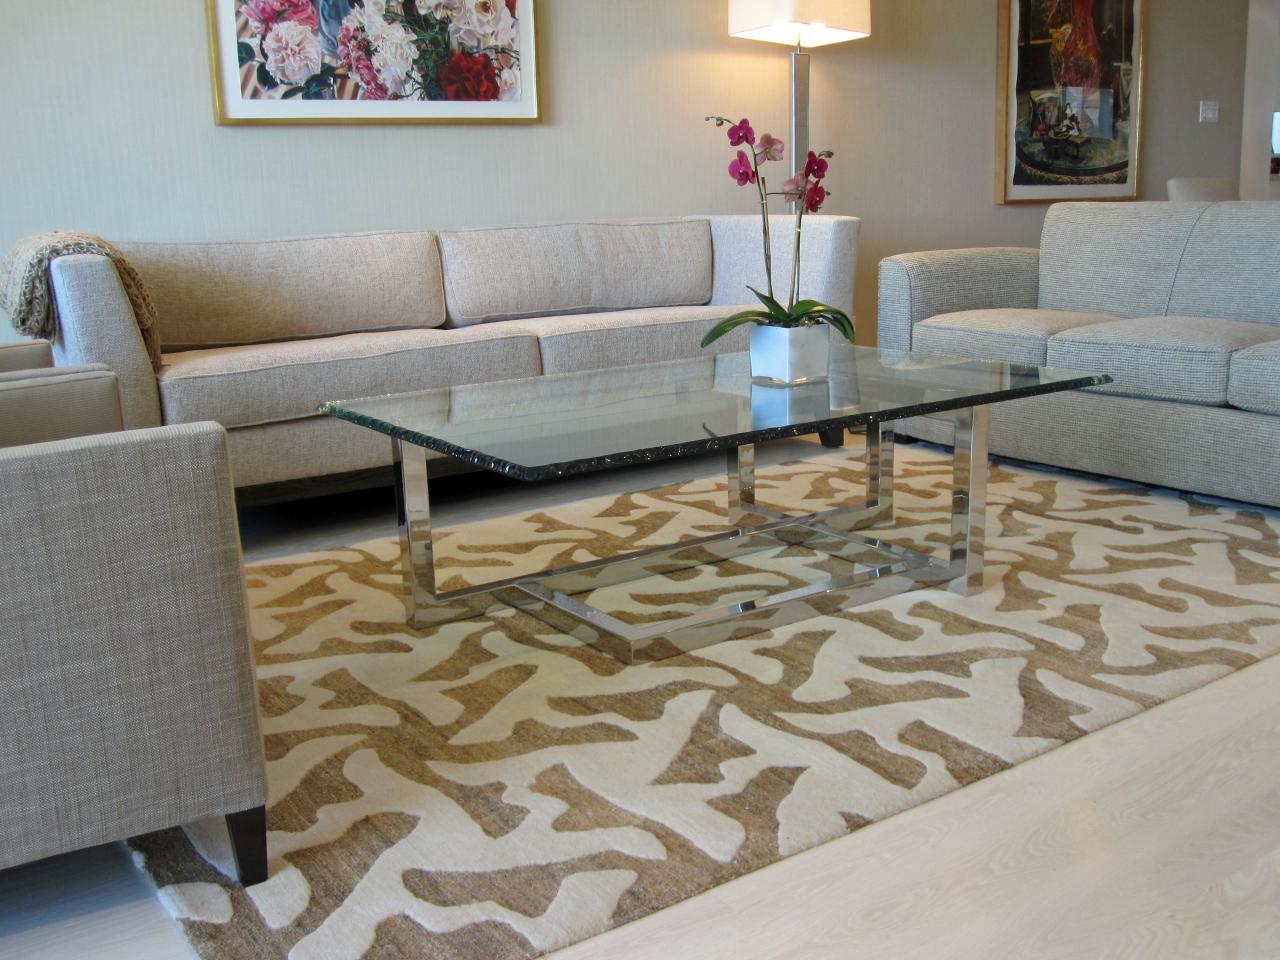 How To Choose Your Living Room Rug, How To Choose Rugs For Living Room